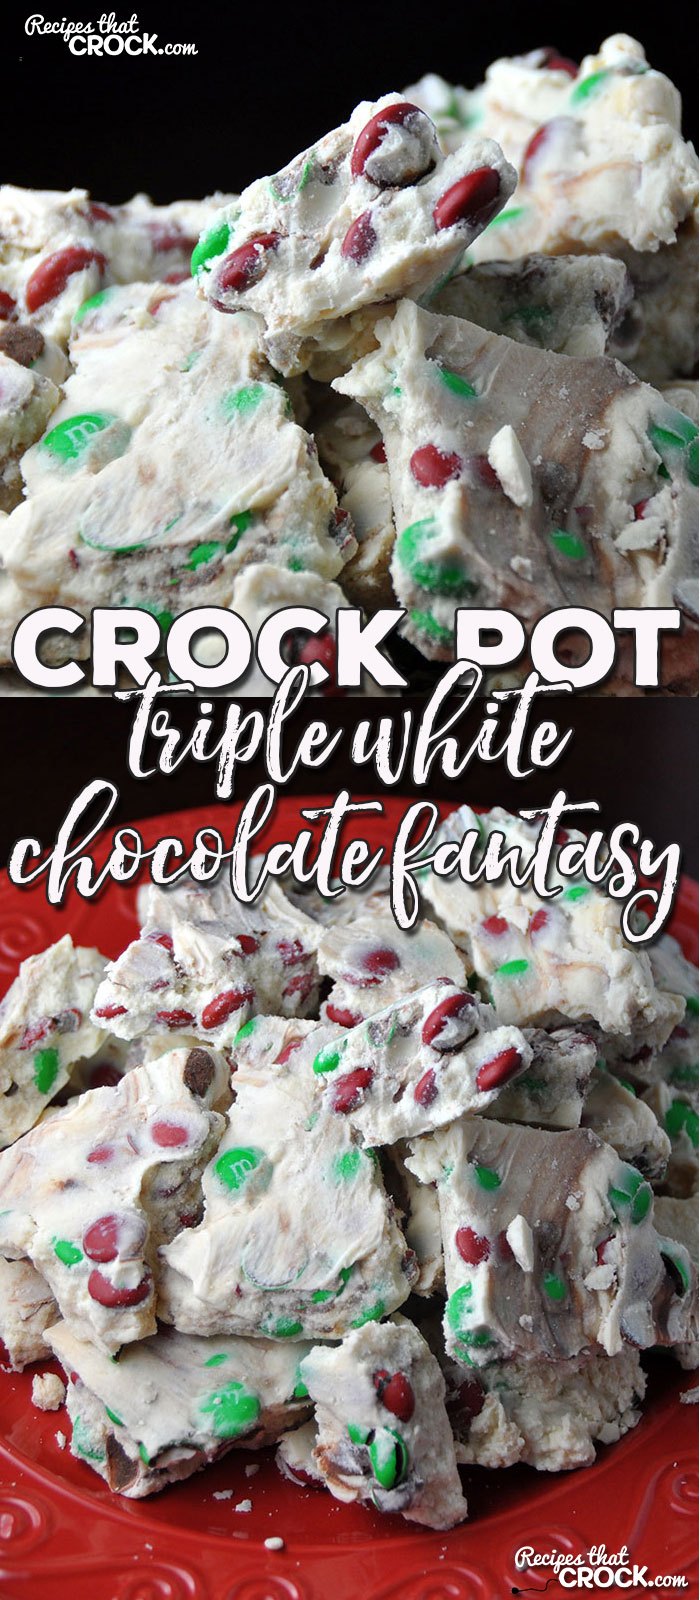 Are you looking for a delicious treat to take to your next party, pitch-in or just to treat yourself? Then you definitely don't want to miss this amazing Crock Pot Triple White Chocolate Fantasy!